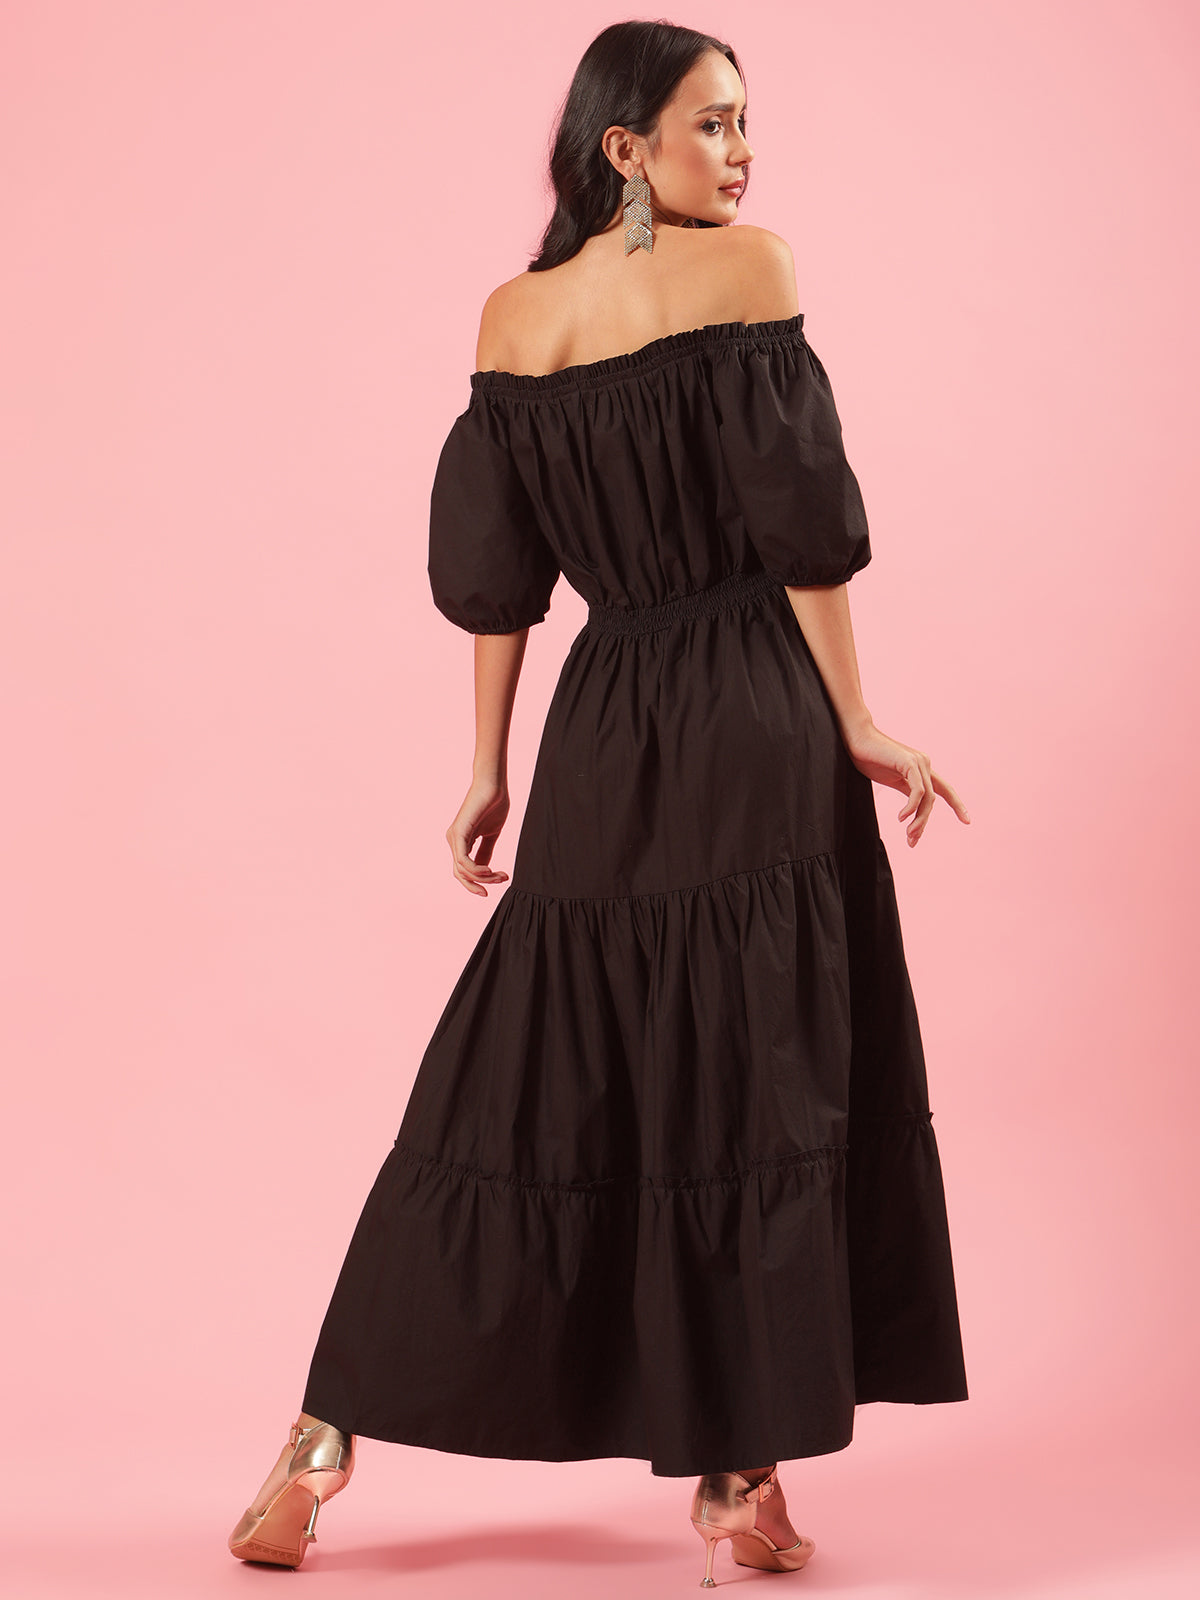 Ariana Black Womens Cotton Off Shoulder Maxi Cocktail Party Dress